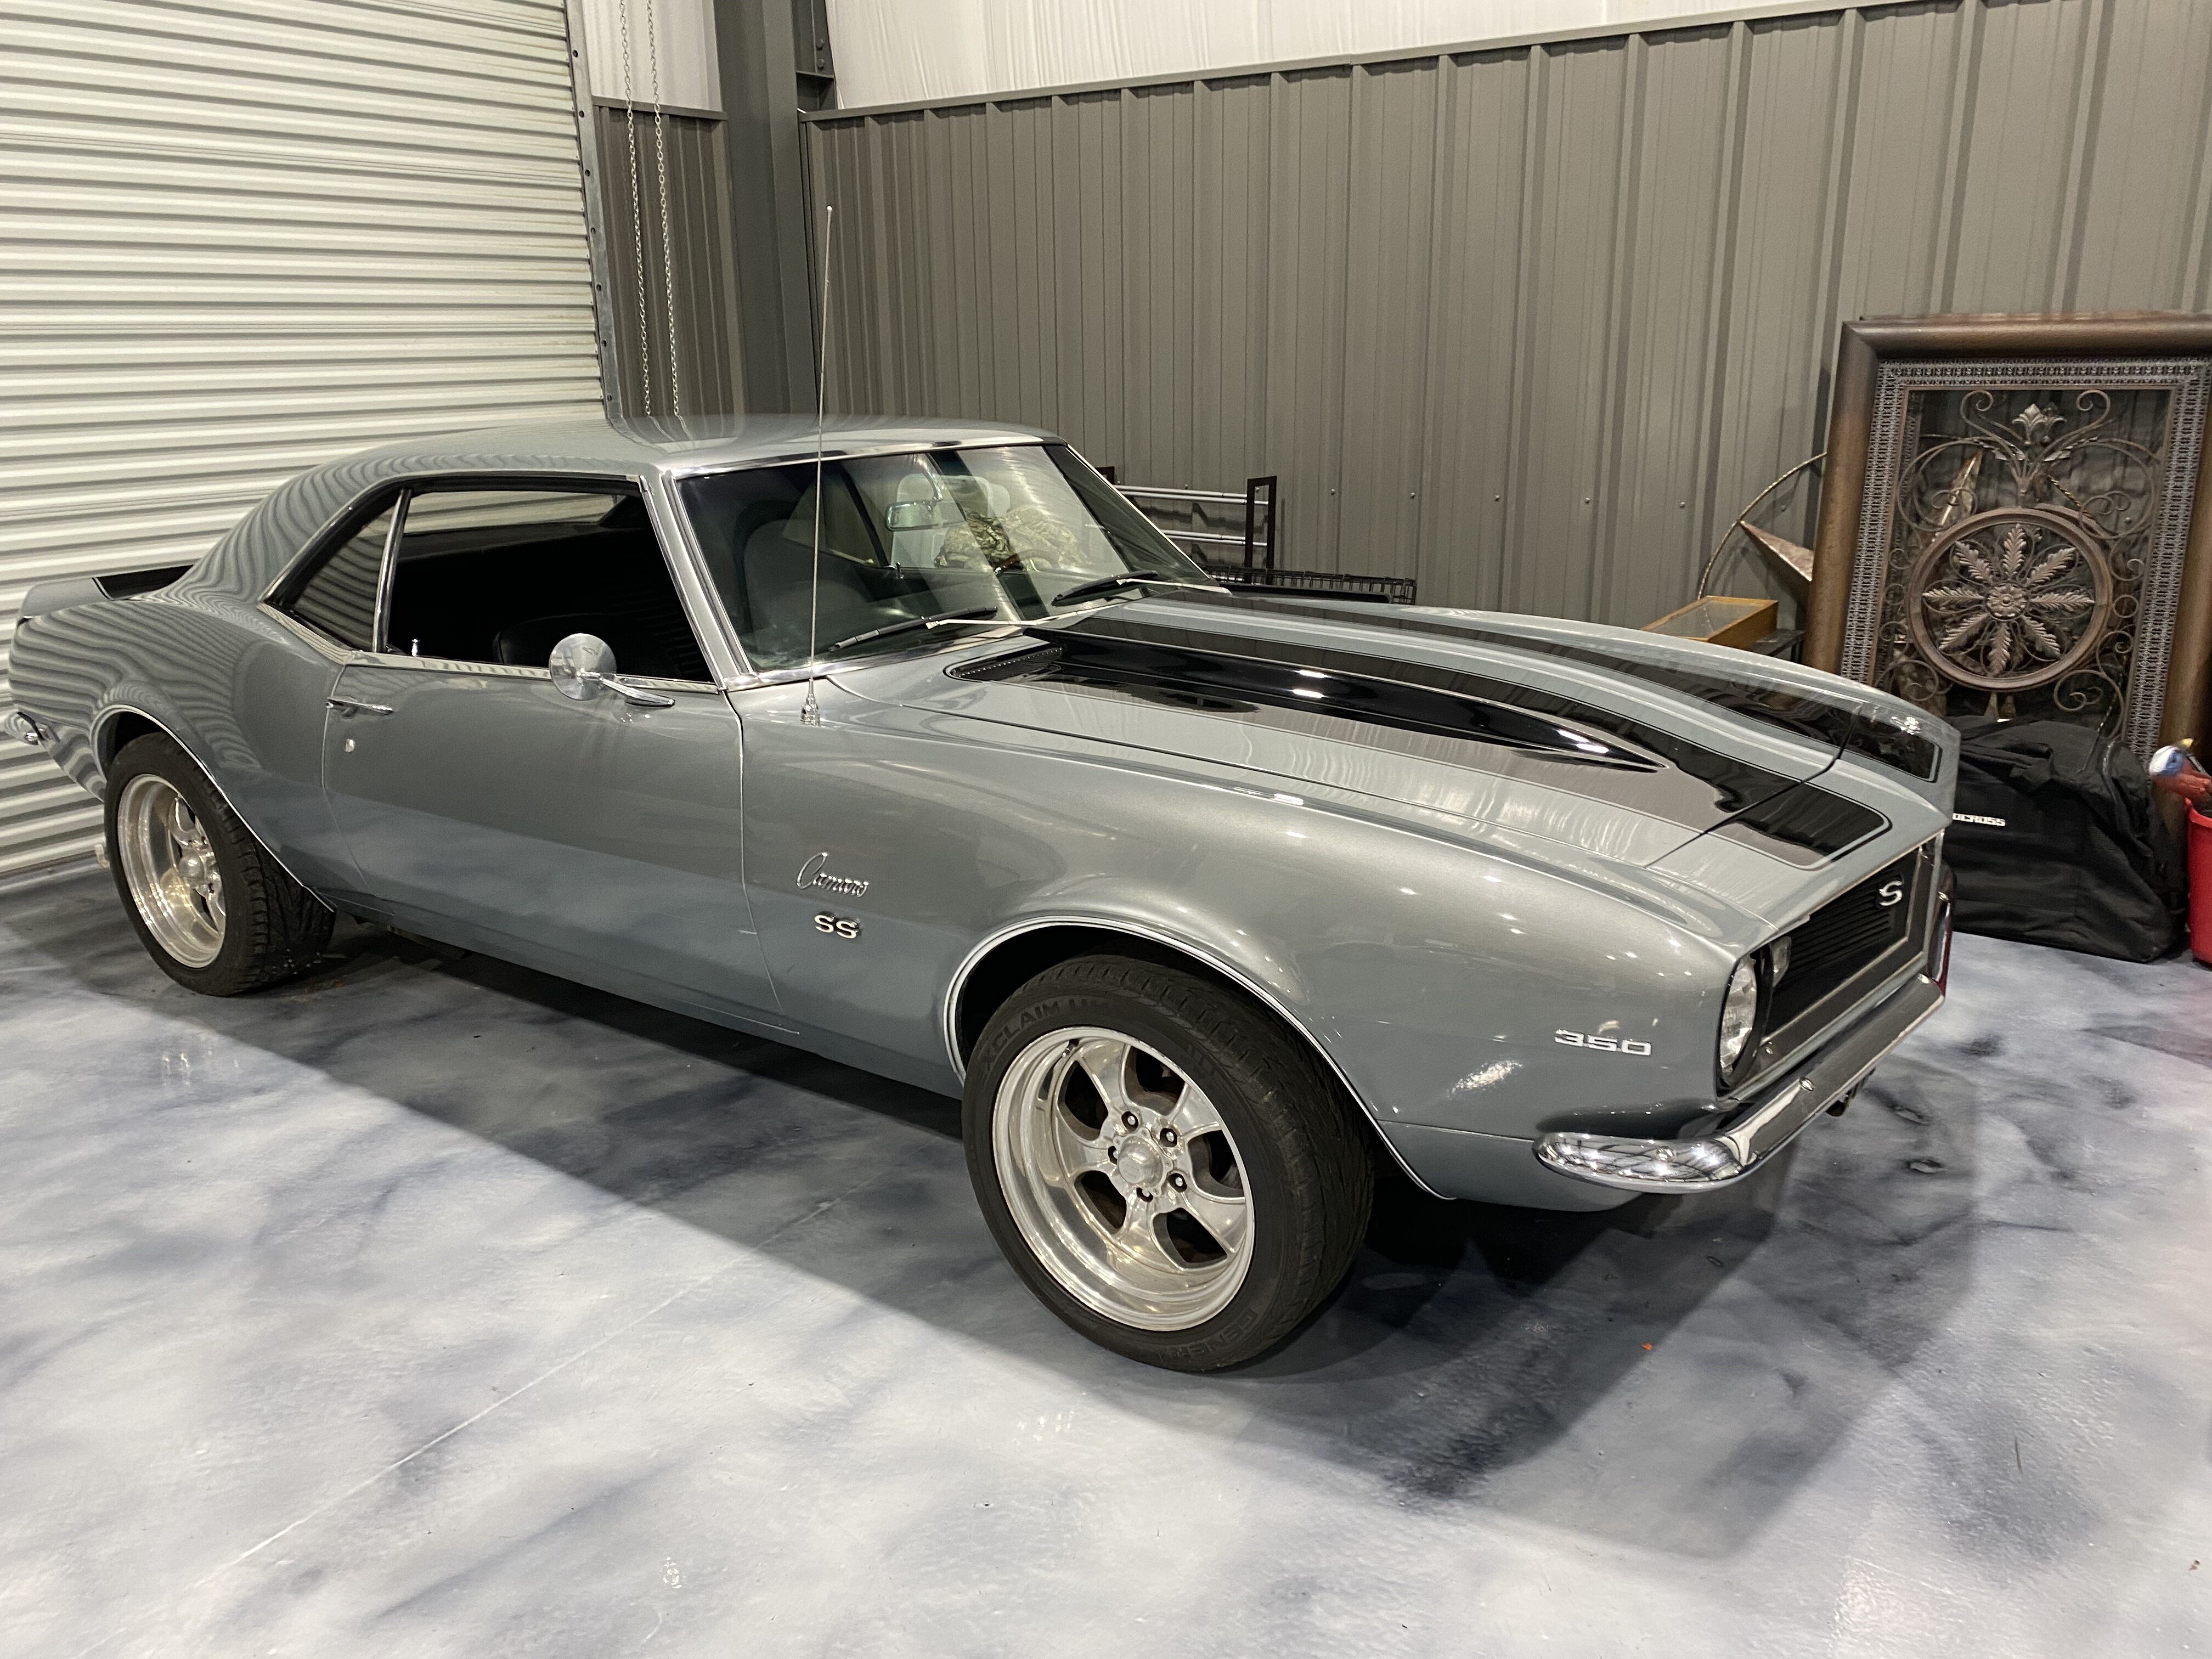 1968 Chevrolet Camaro Ss Coupe For Sale Near League City Texas Classics On Autotrader